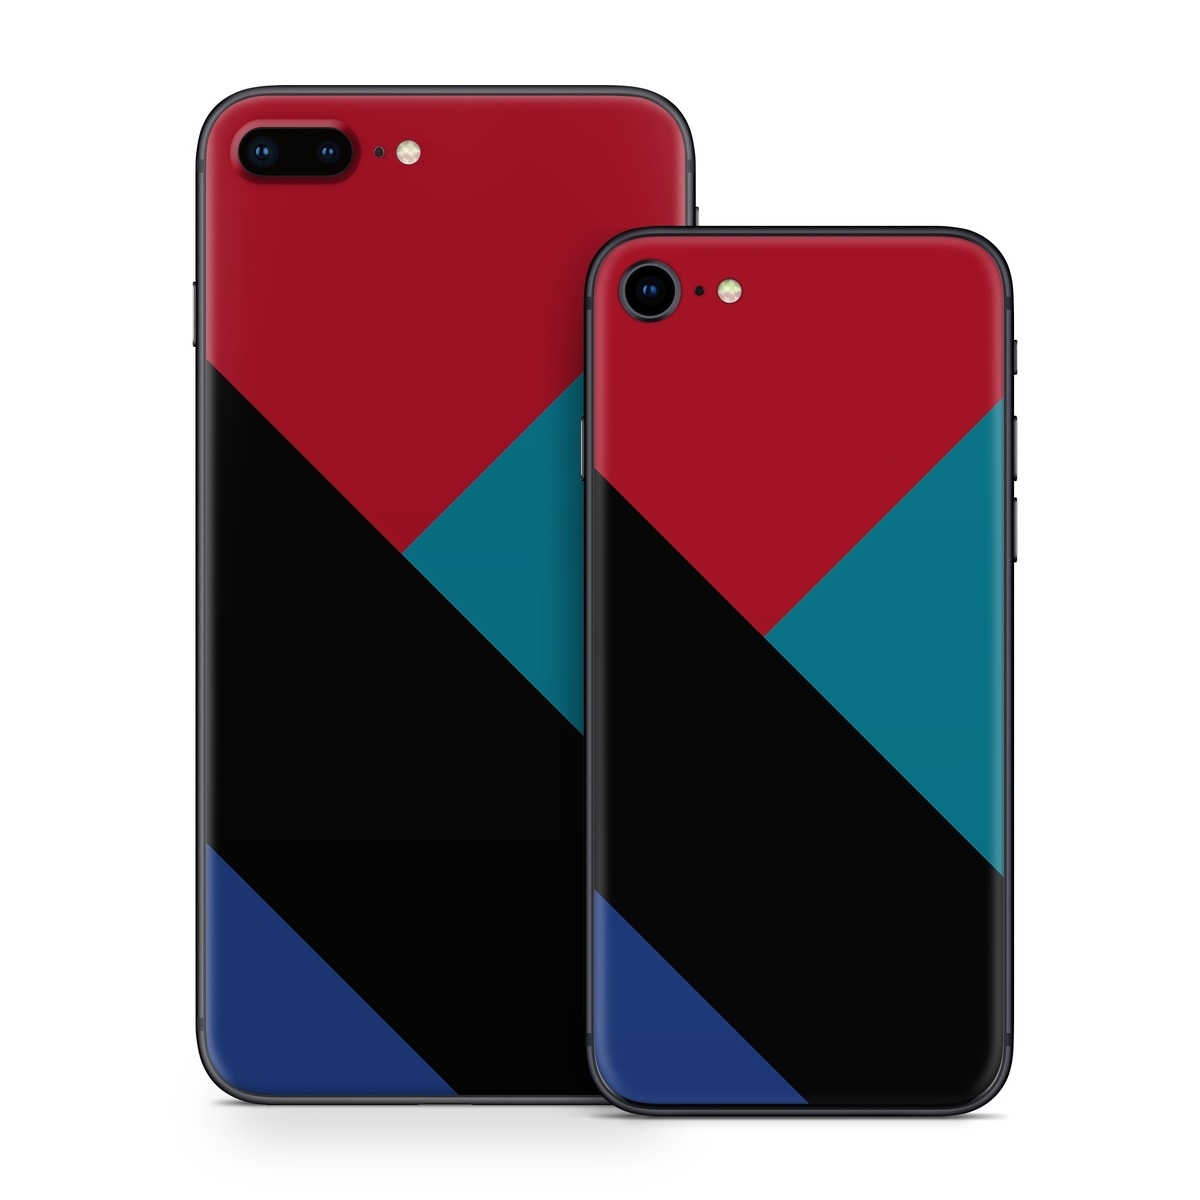 iPhone 8 Series Skin design of Blue, Green, Turquoise, Azure, Teal, Electric blue, Line, Pattern, Design, Graphic design, with black, blue, red colors